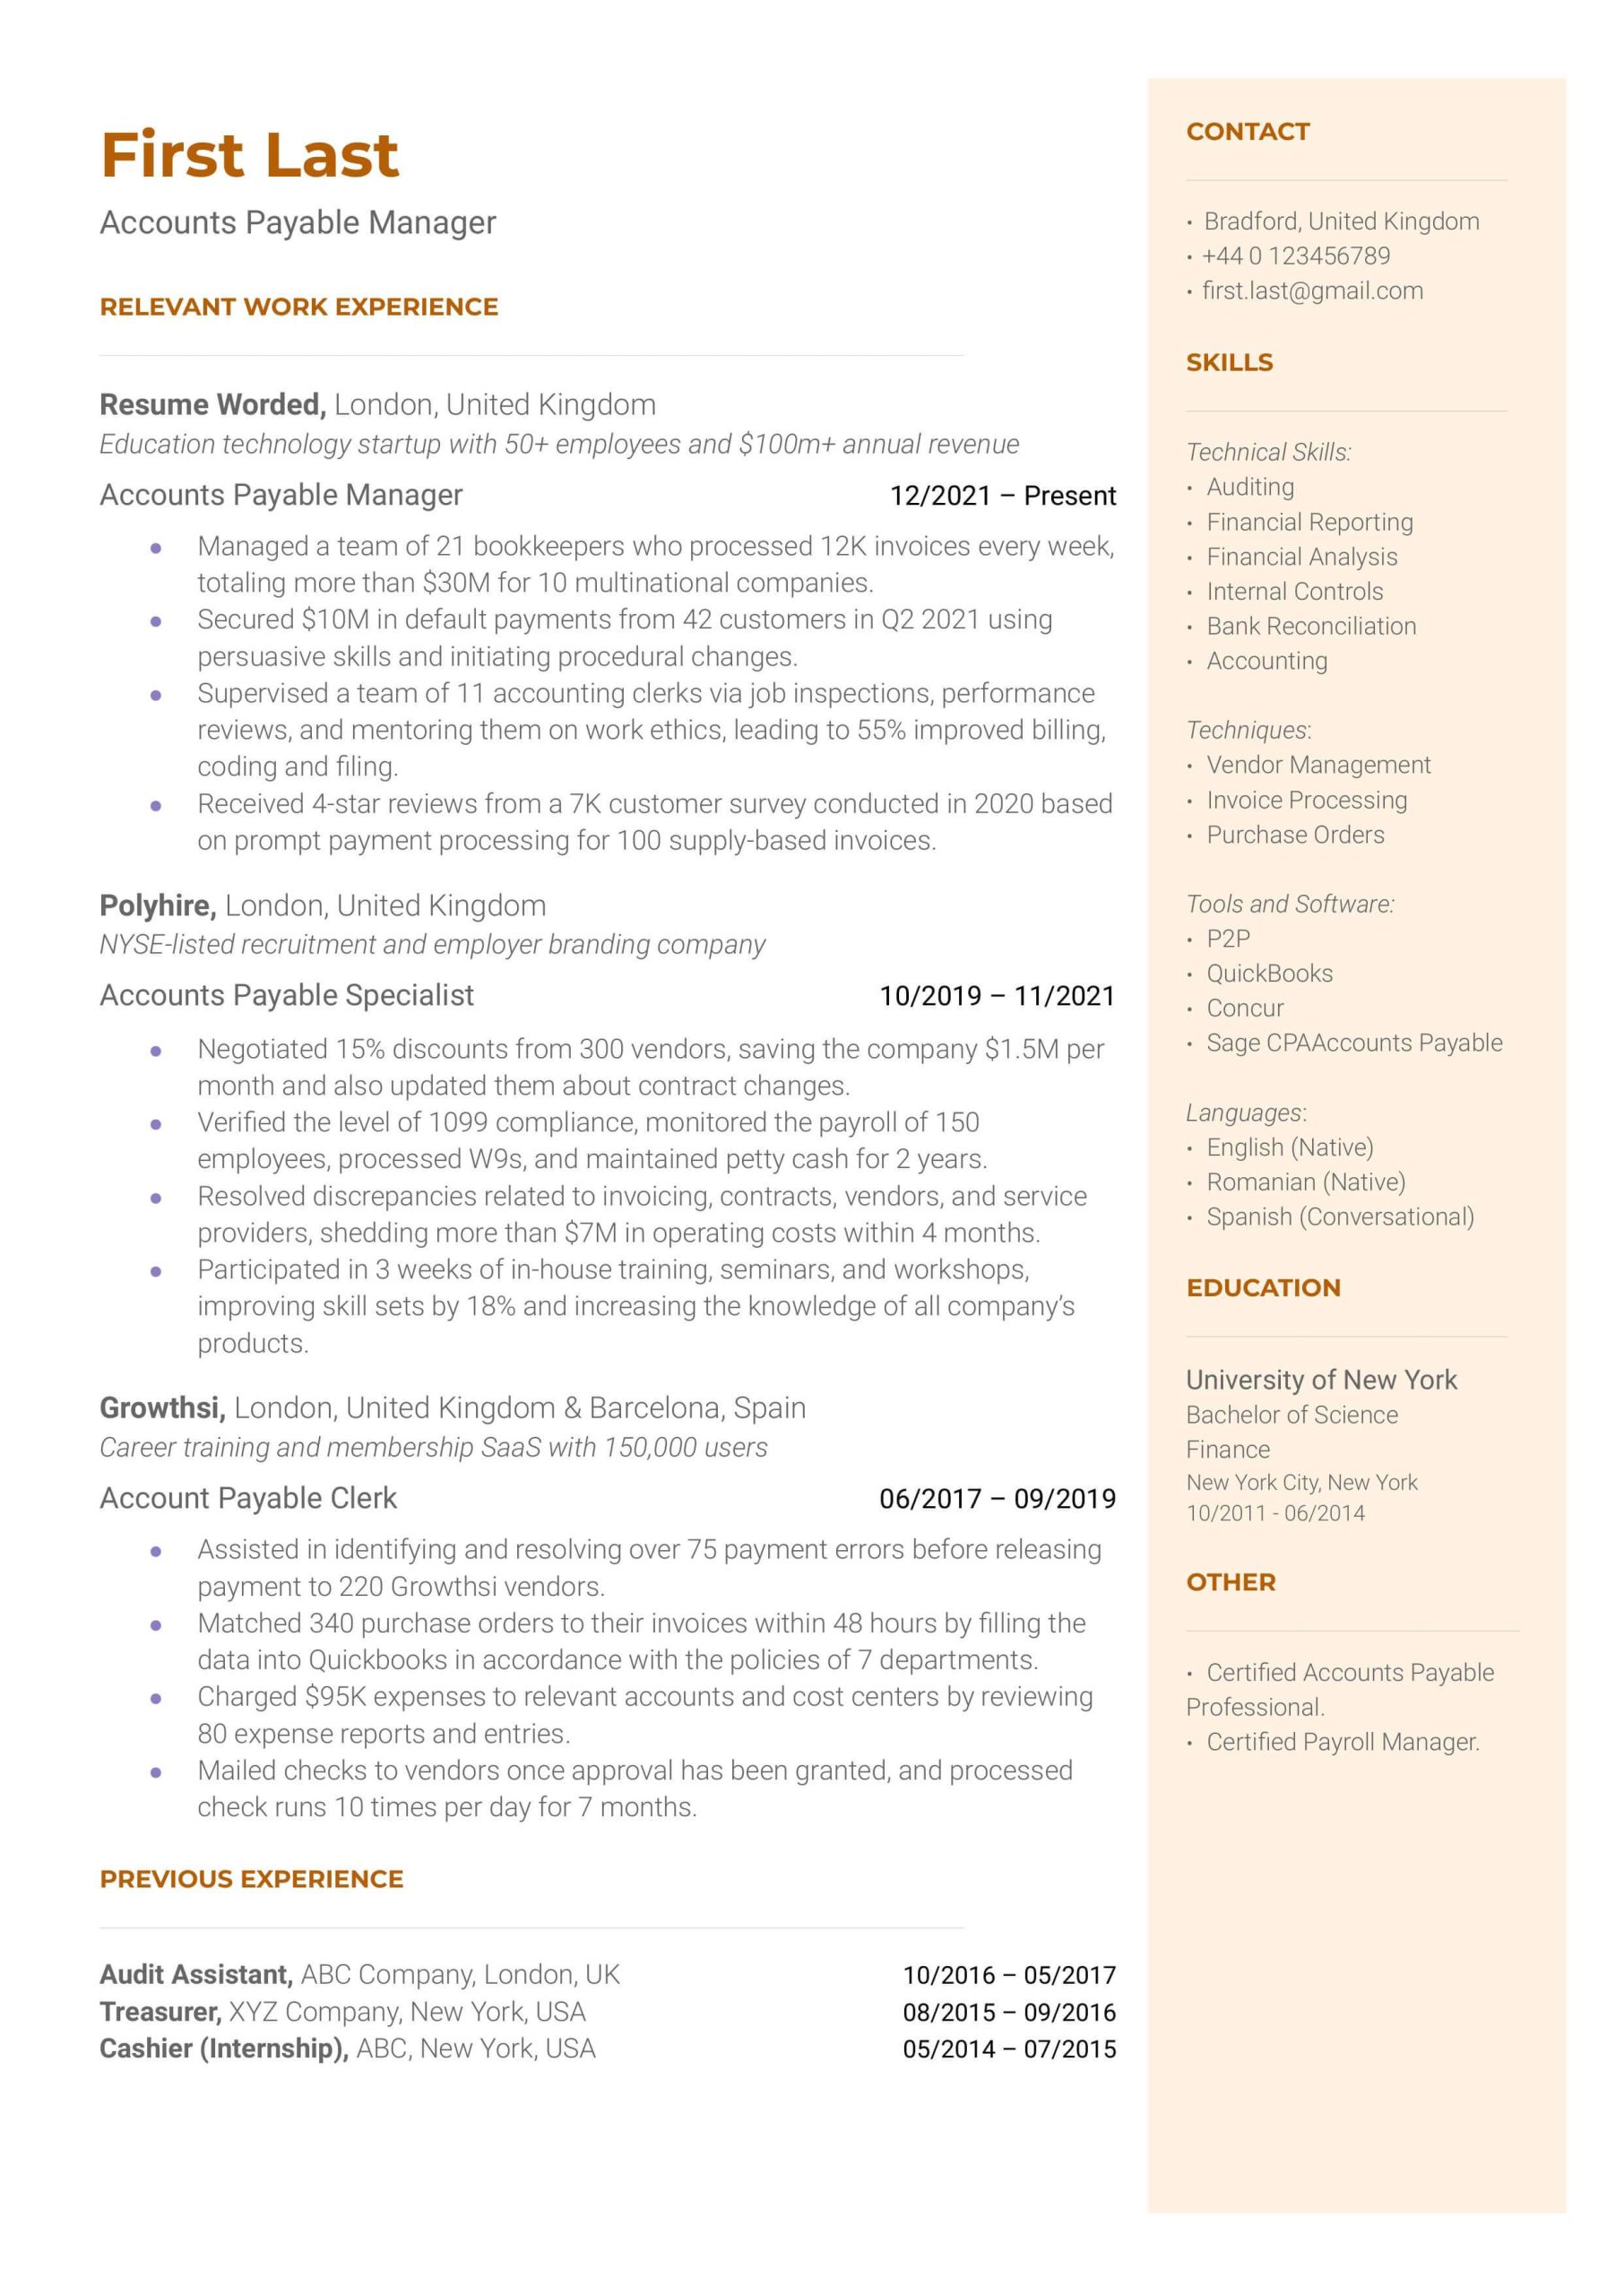 Vp Of Demand Geneneration Sample Resume Intros 13 Account Manager Resume Examples for 2022 Resume Worded